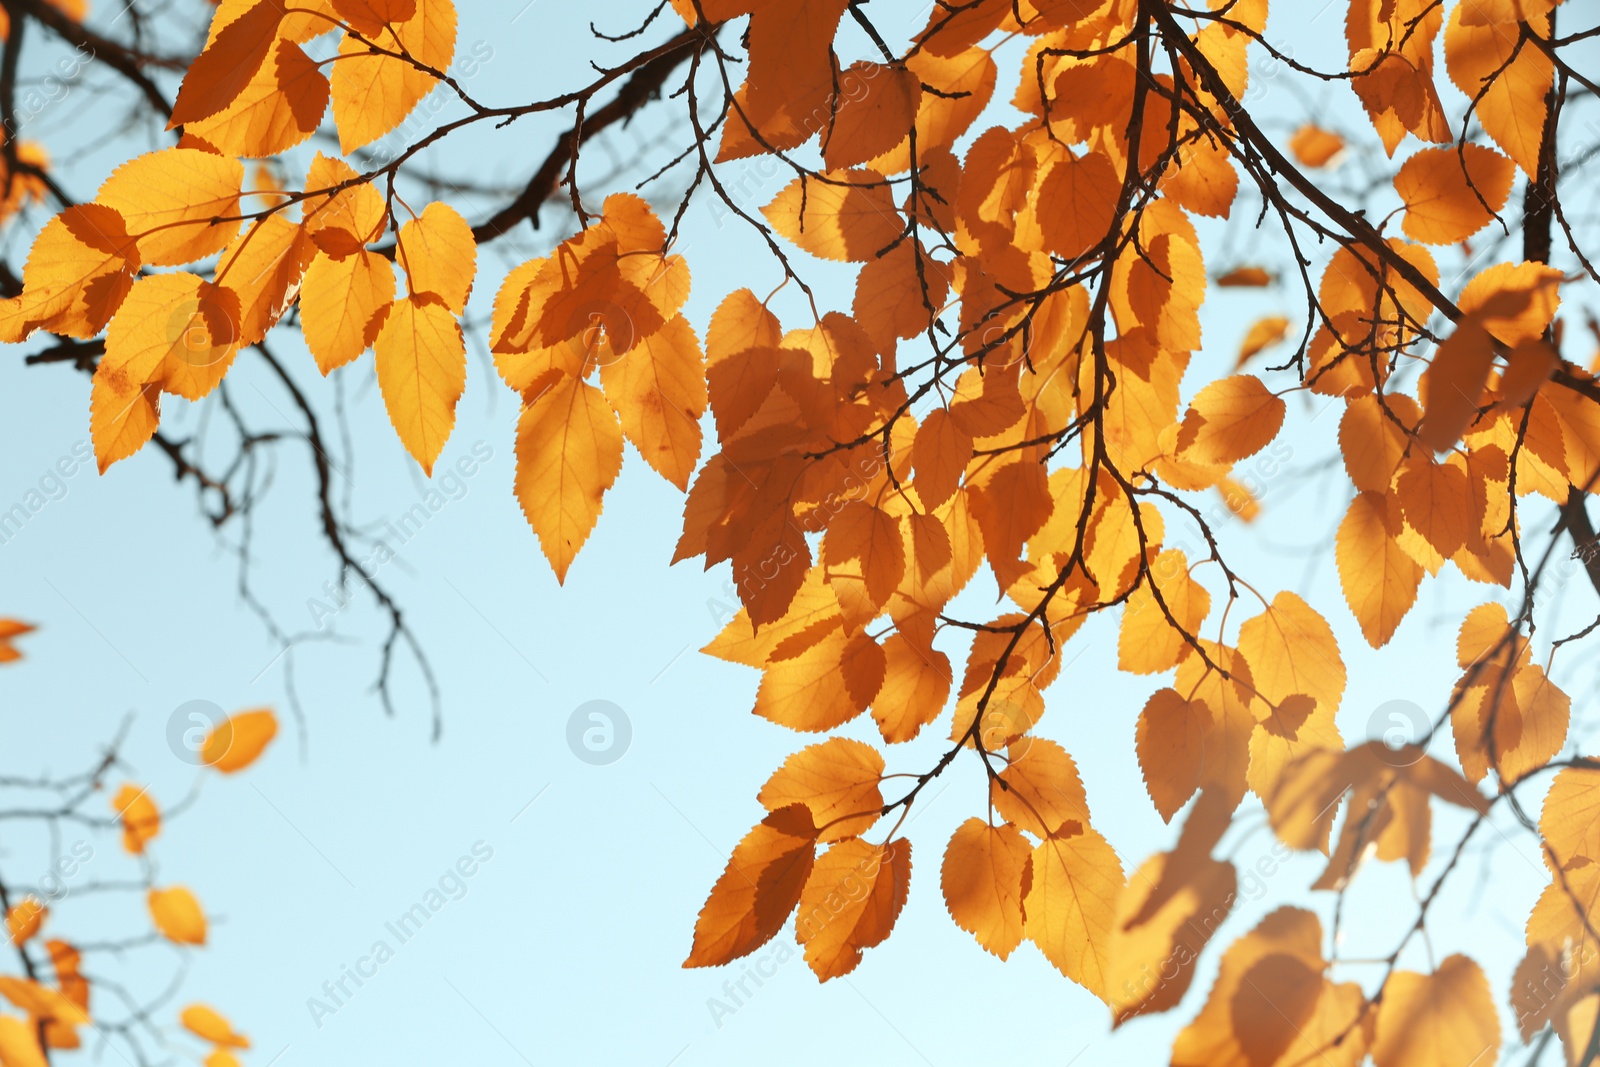 Photo of Twigs with sunlit golden leaves on autumn day, outdoors